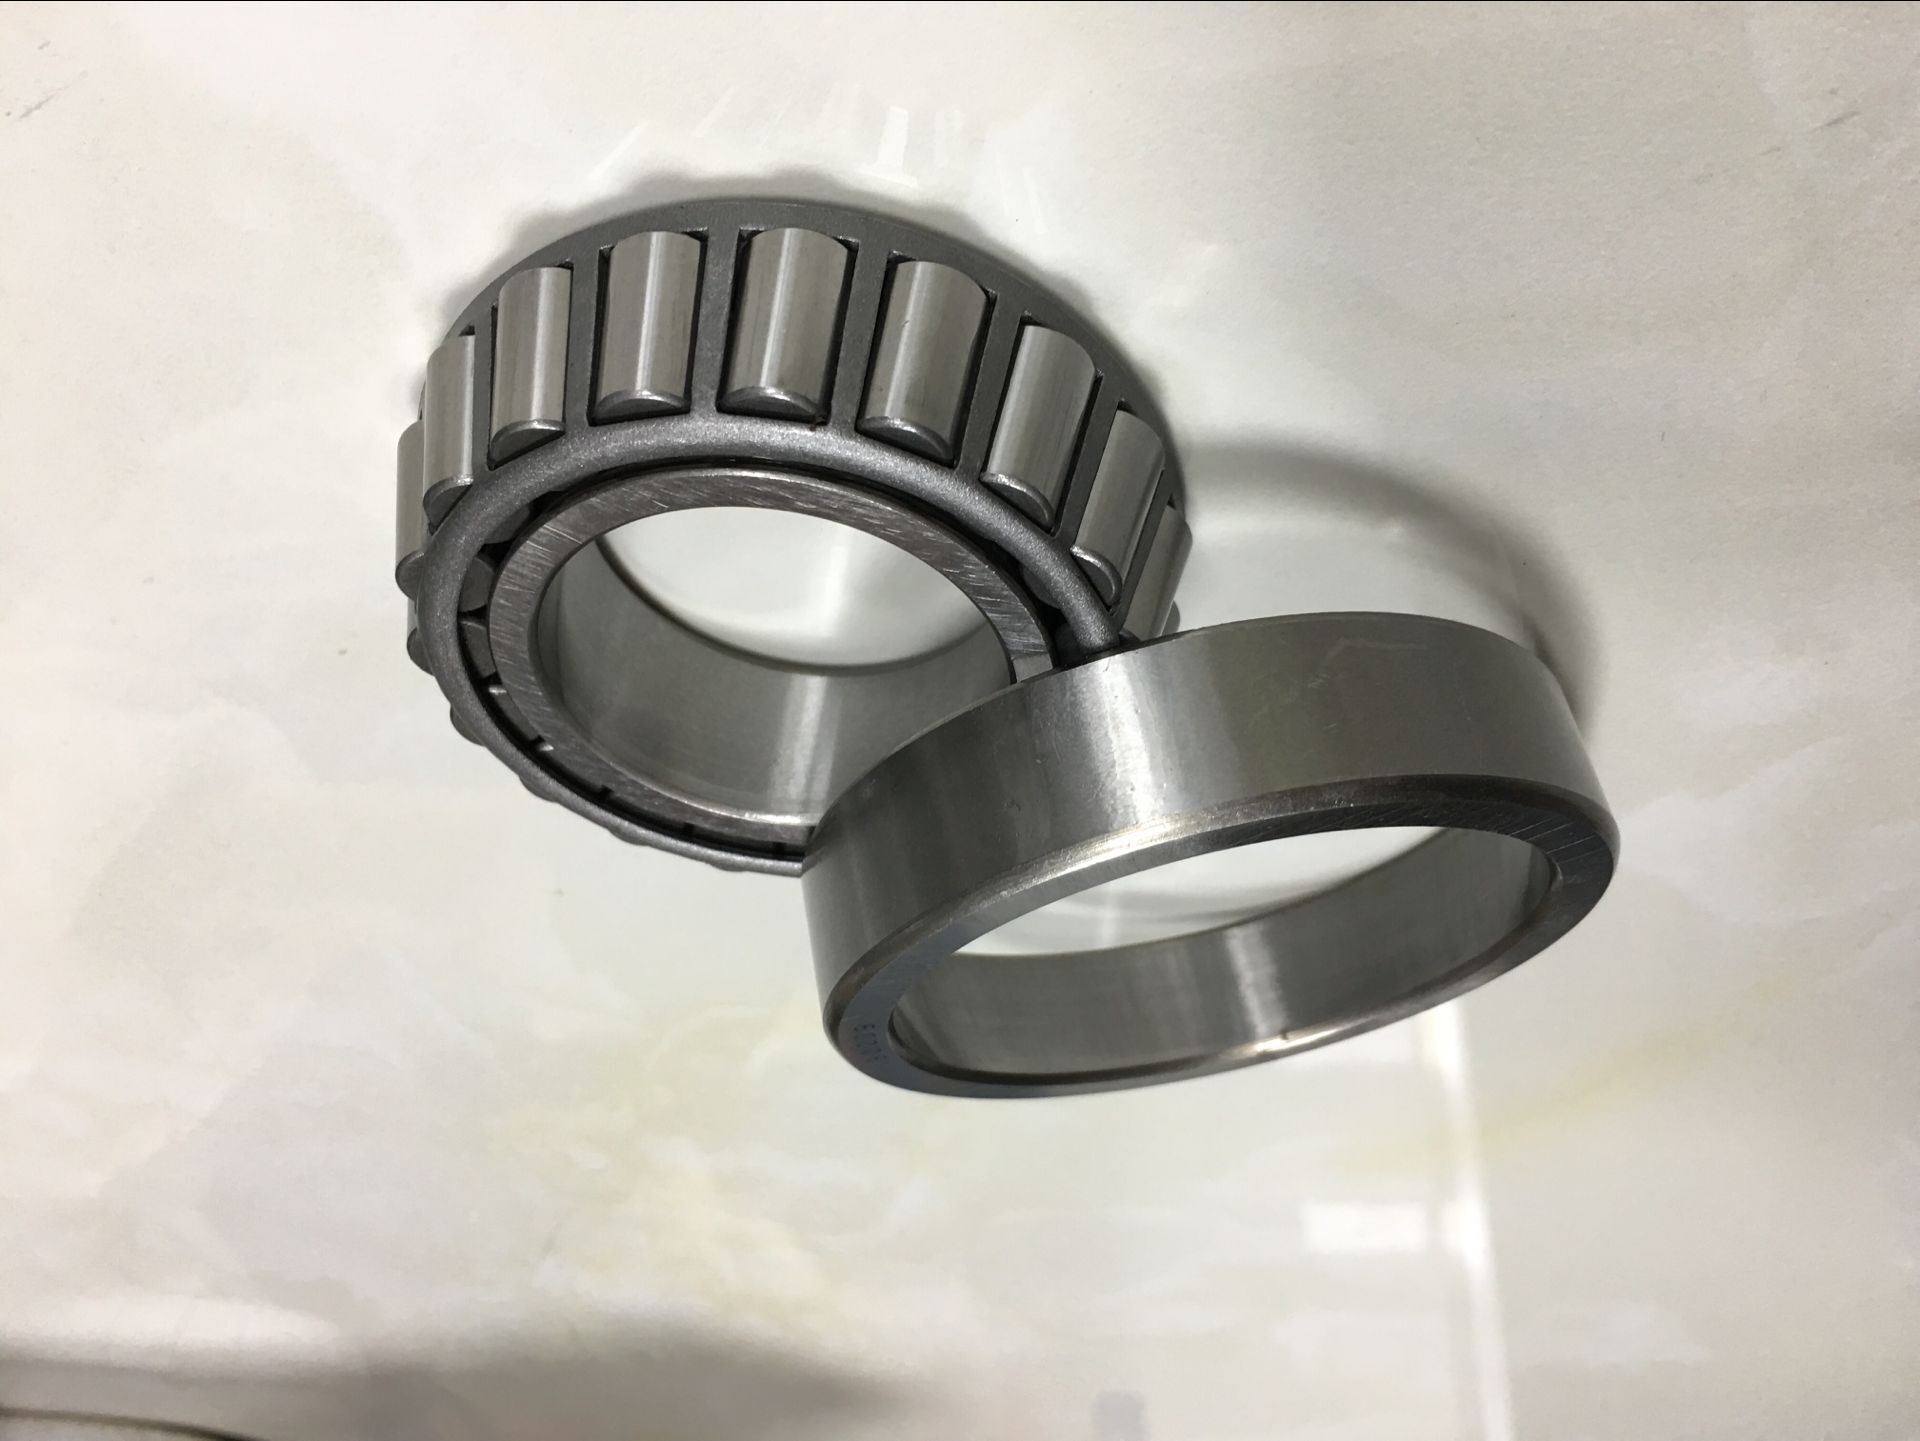 745A/742 Taper Roller Bearing, High Quality High Speed